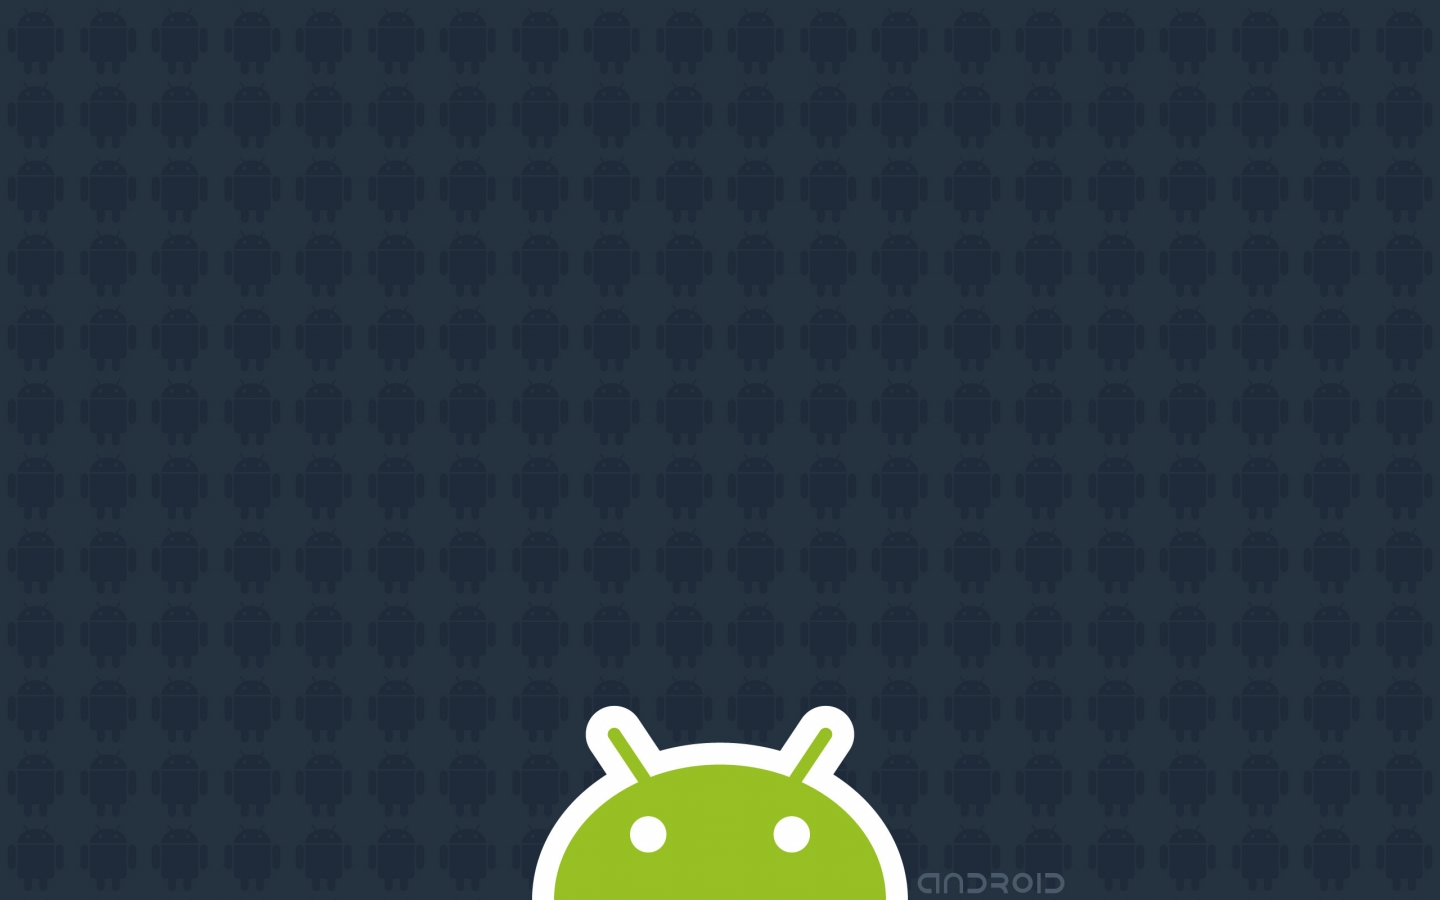 Android Pattern for 1440 x 900 widescreen resolution